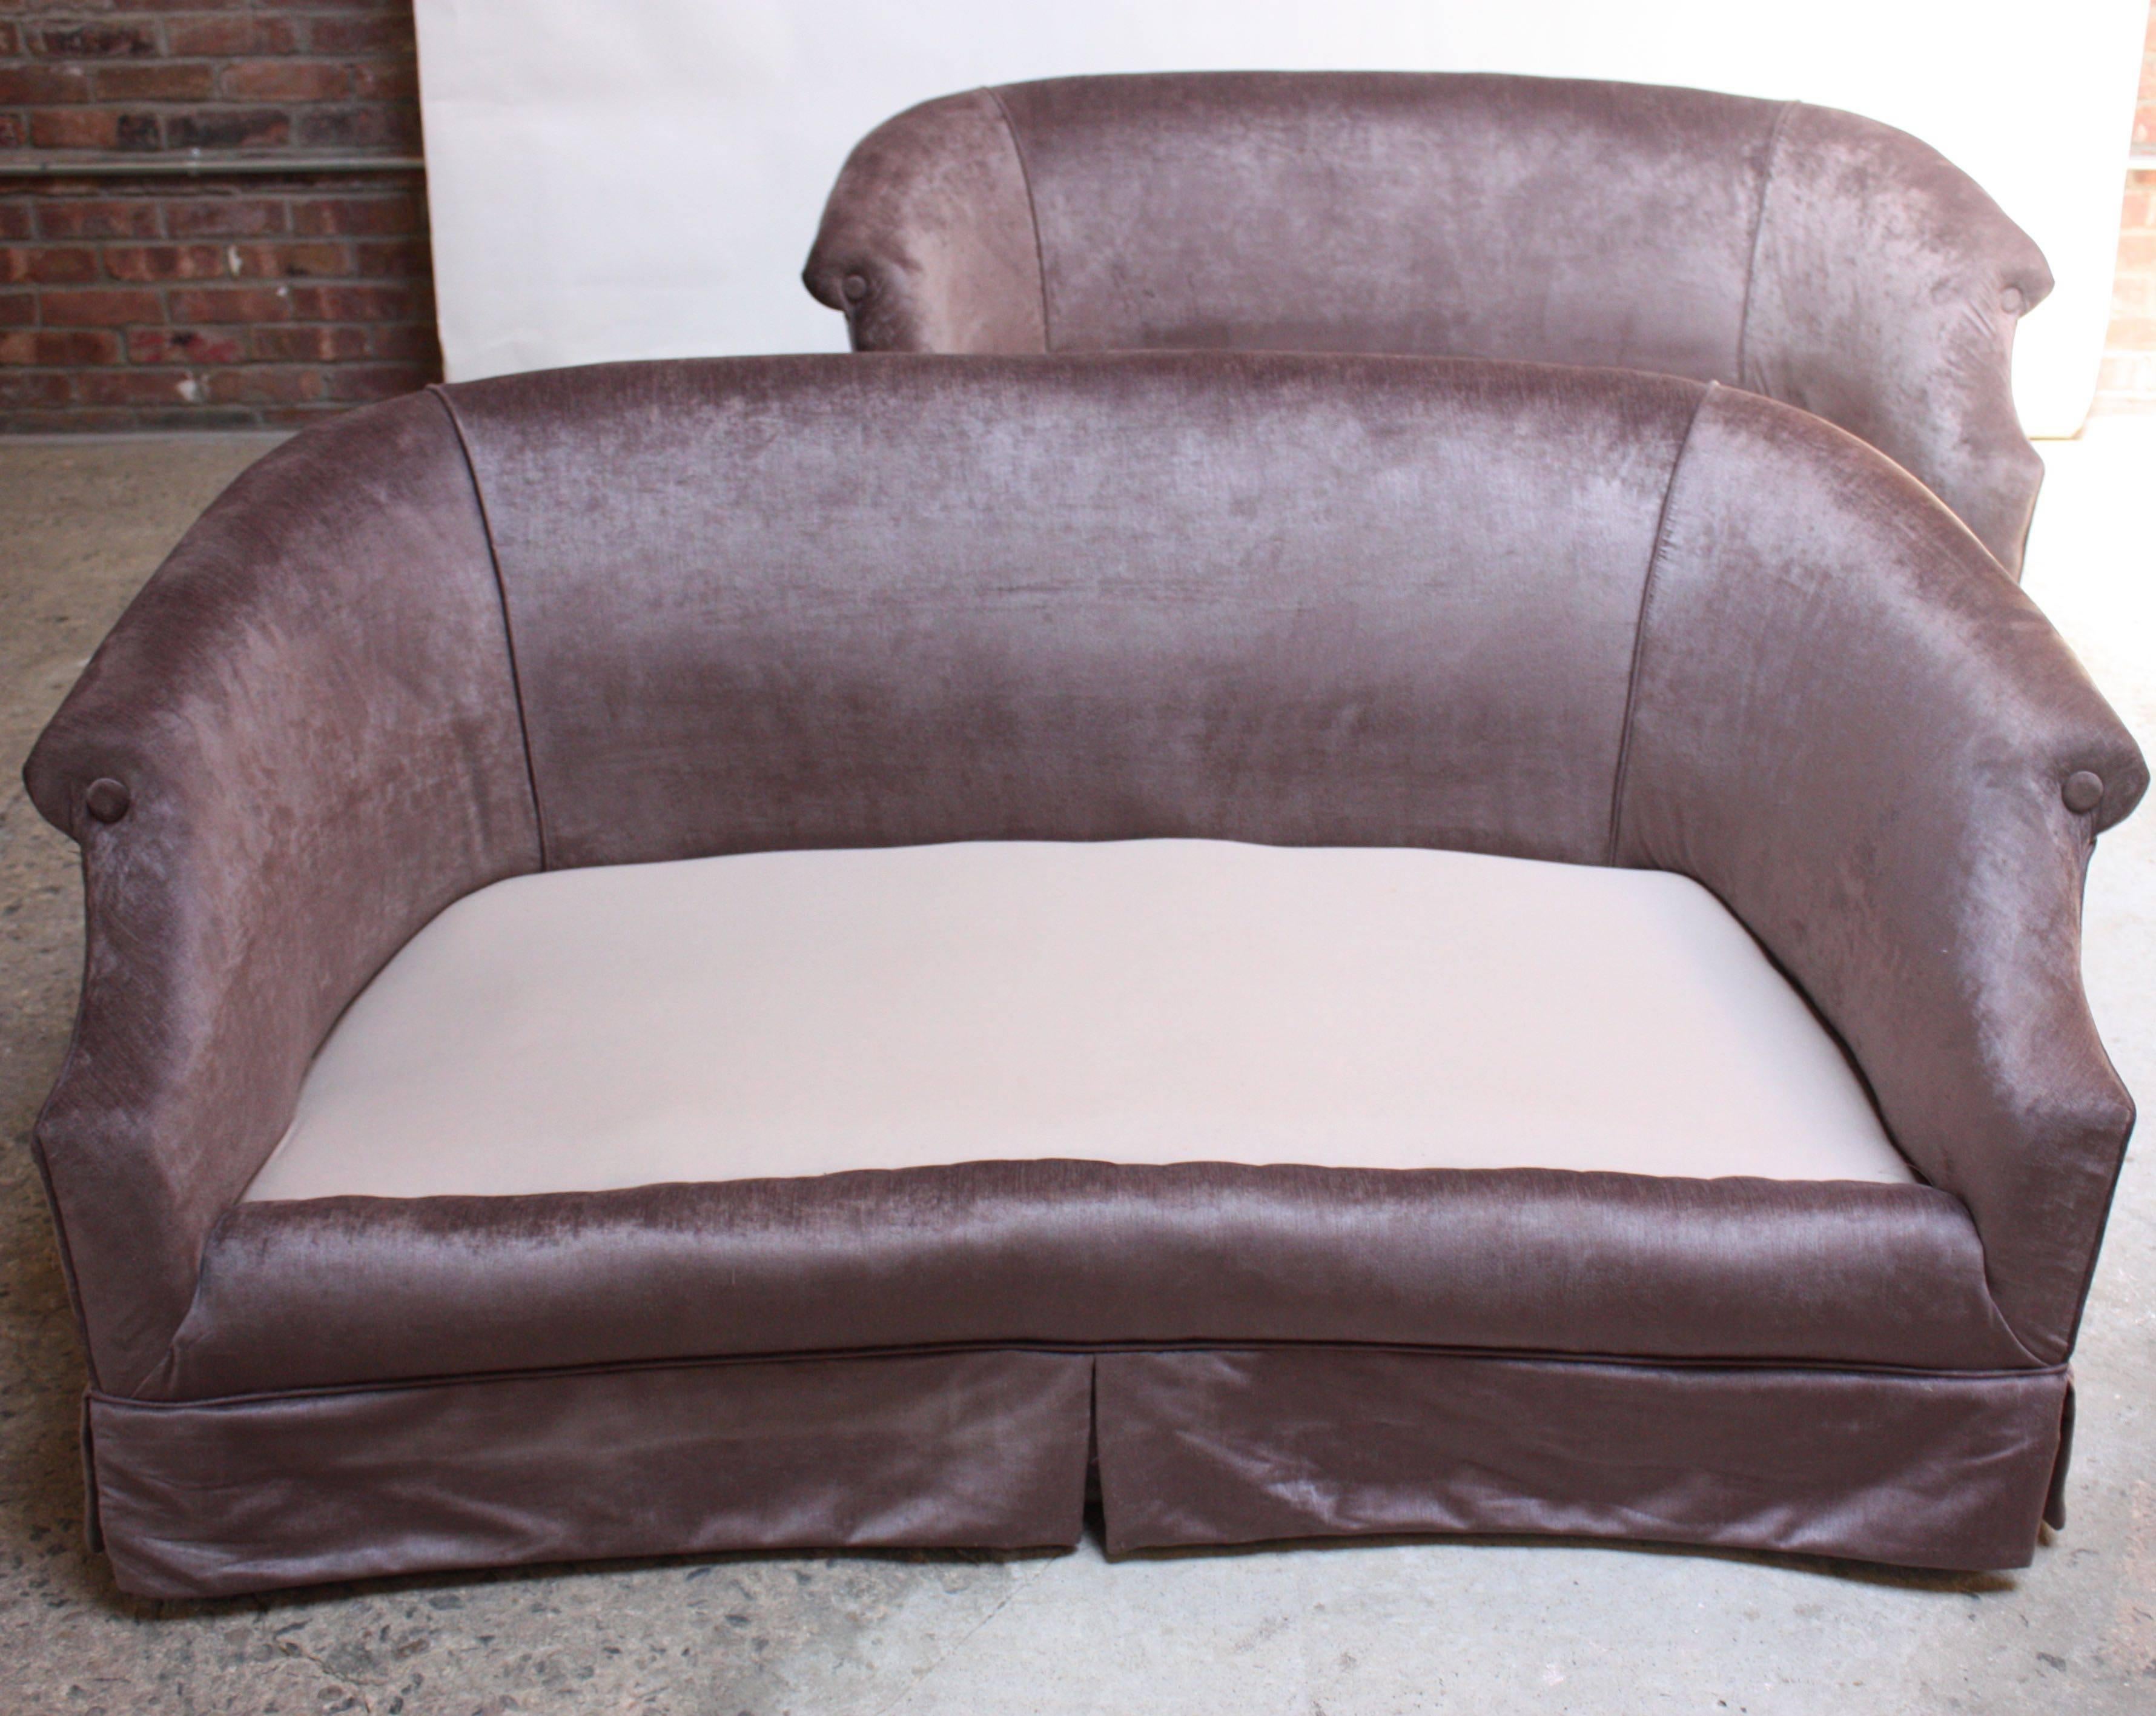 These glamorous settees in light lavender velvet feature low back, rolled-arm frames and spring-construction. The seat cushions were purposefully designed to be relatively high for additional support but could easily be modified and lowered to